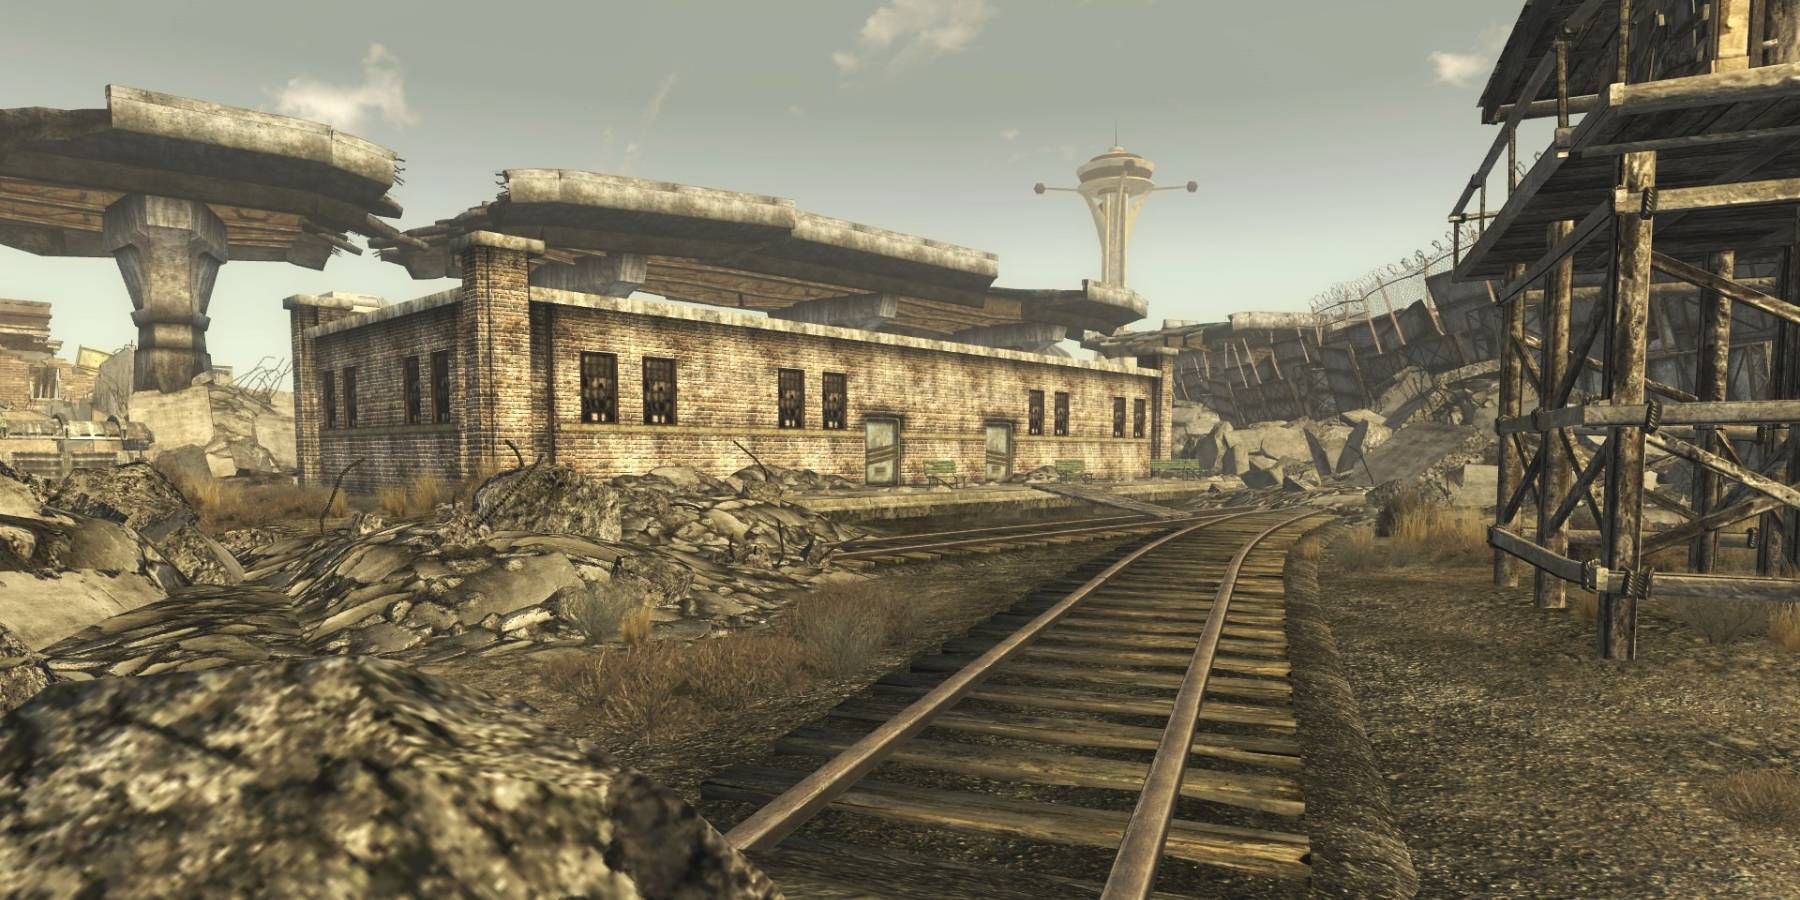 The Freeside Train Station in Fallout: New Vegas